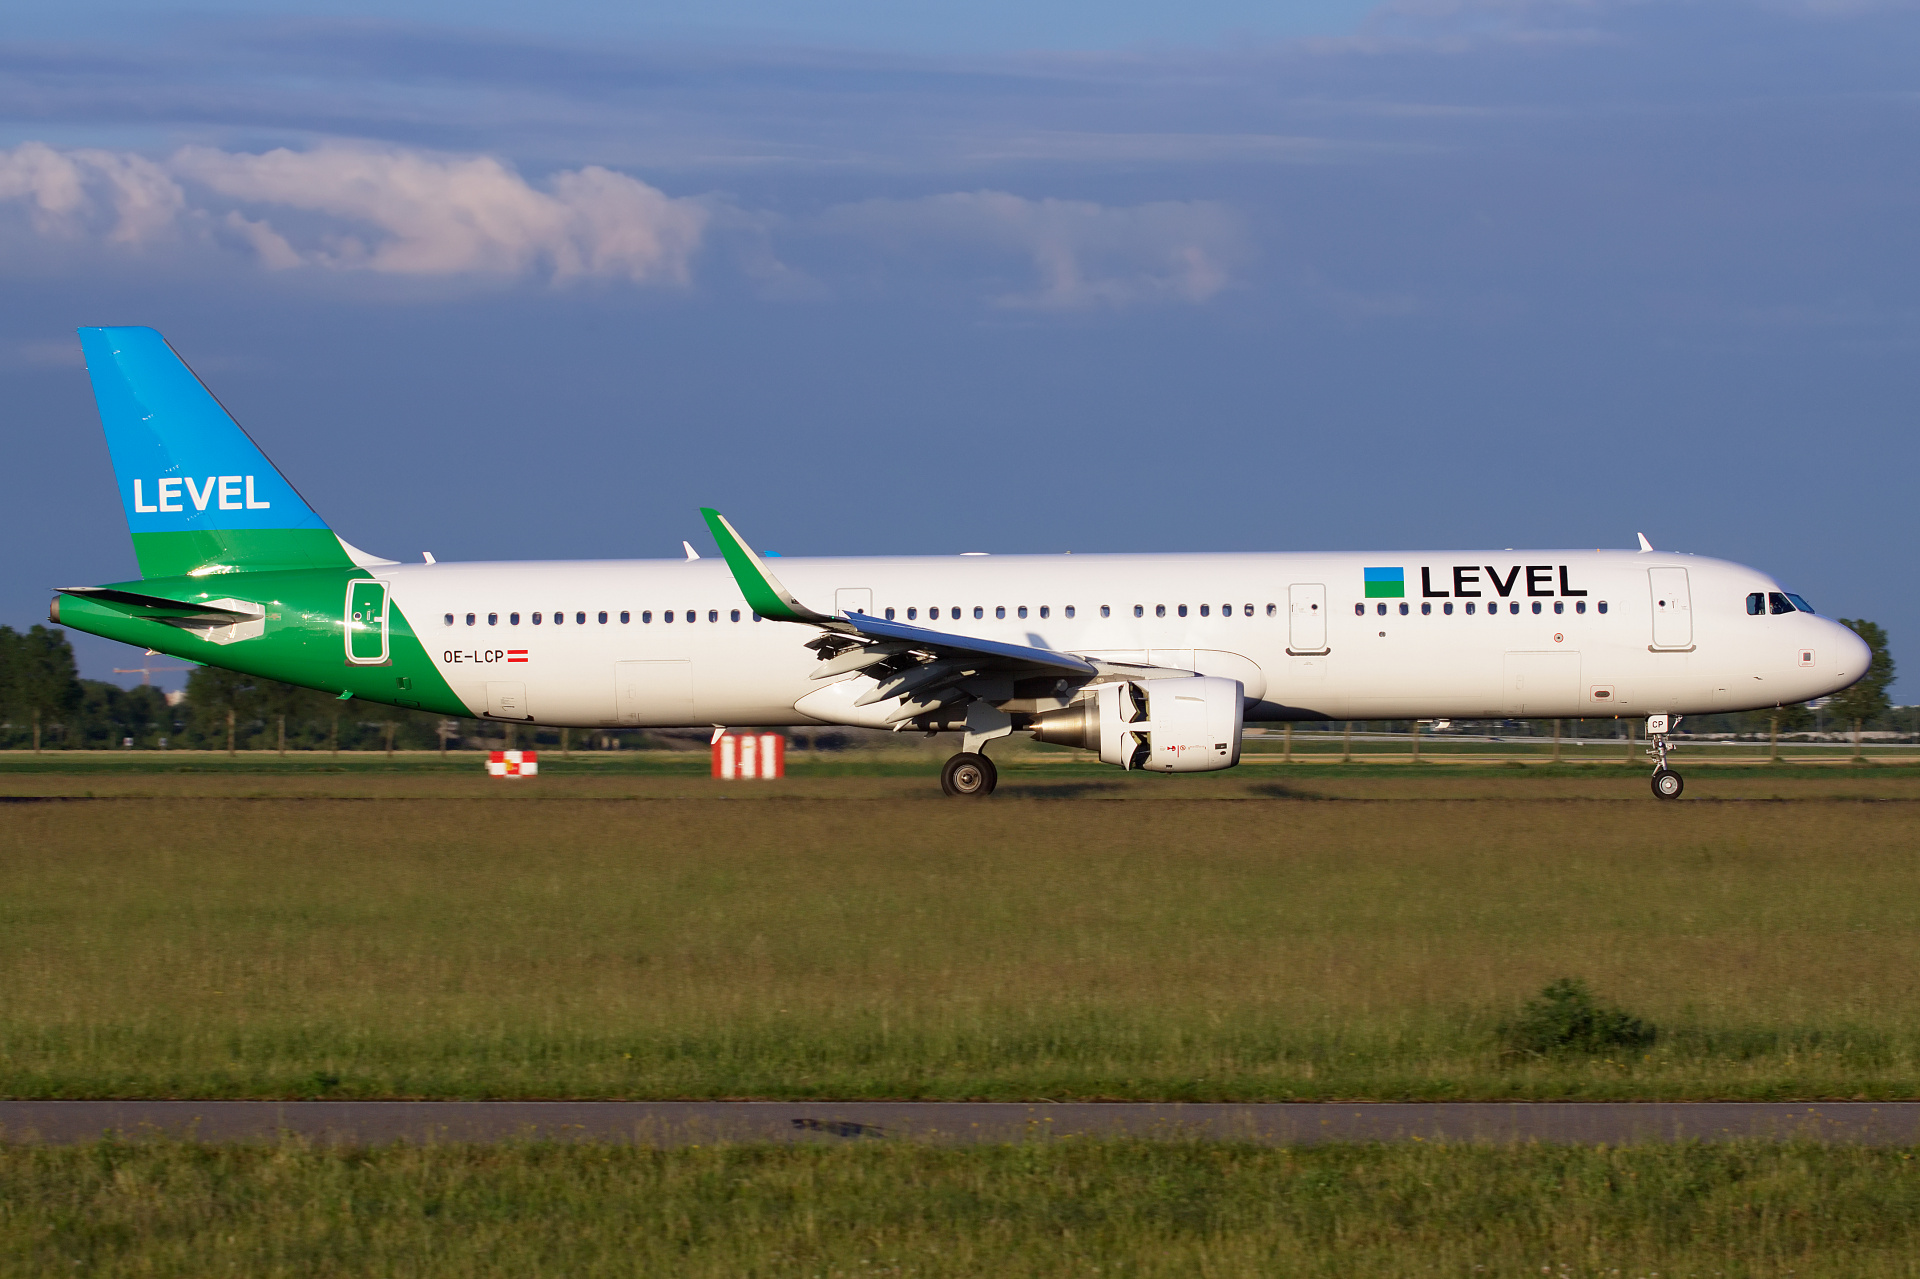 OE-LCP, Level (Aircraft » Schiphol Spotting » Airbus A321-200)